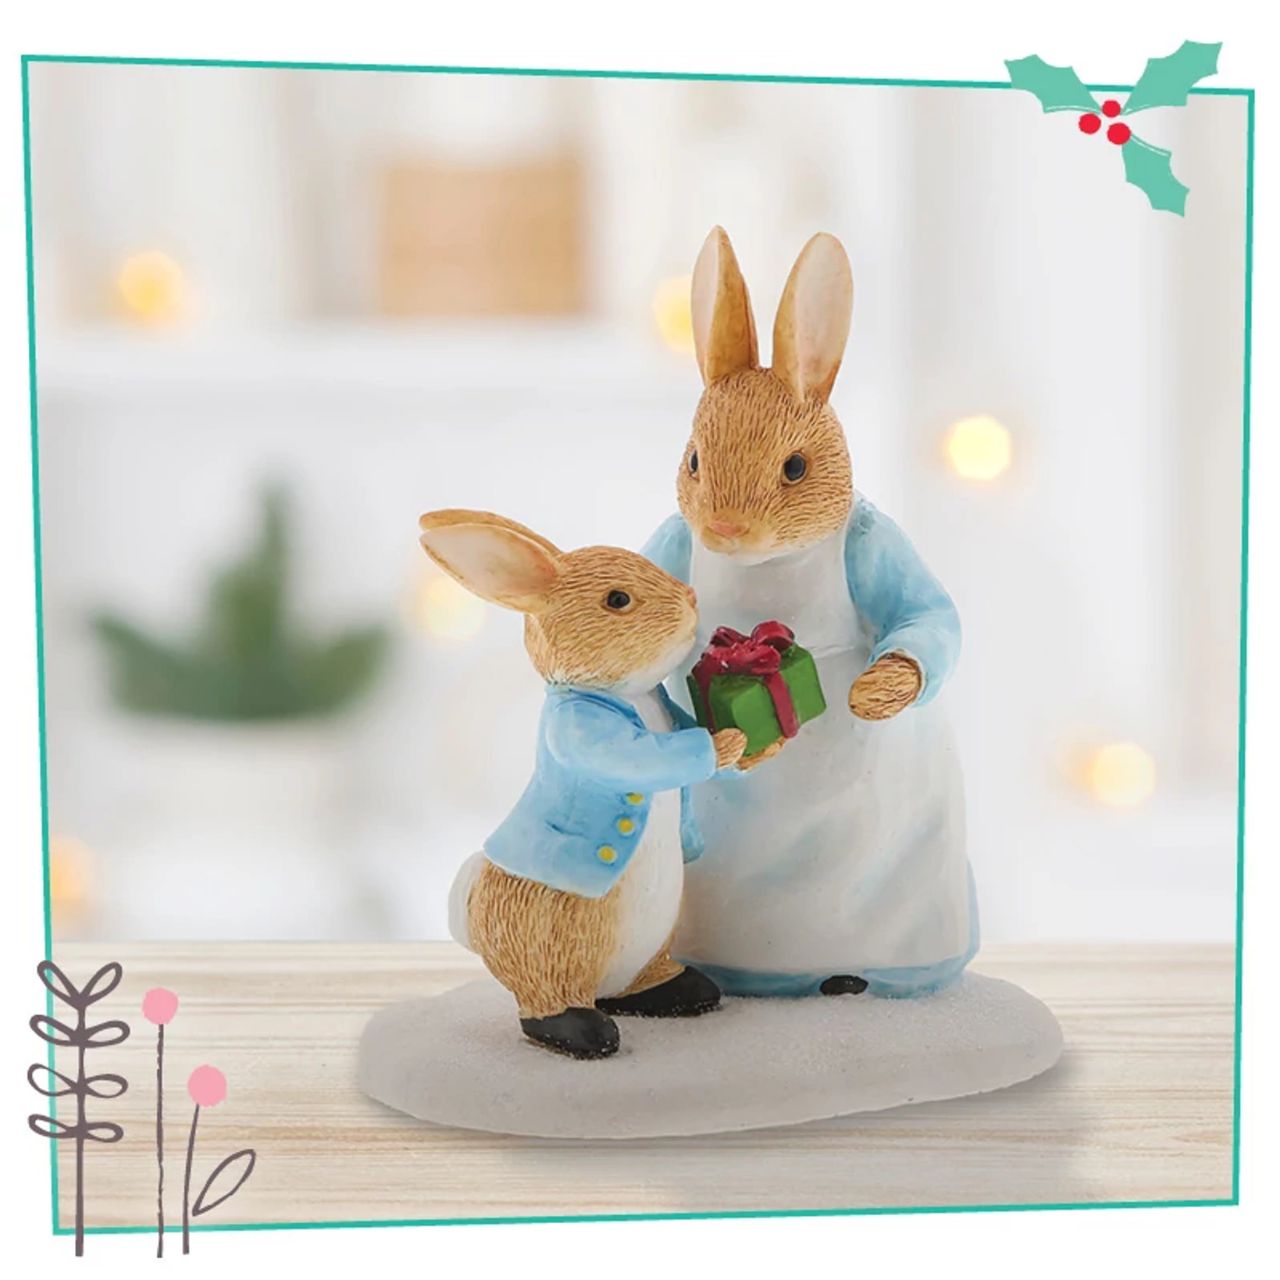 Beatrix Potter Mrs. Rabbit Passing Peter Rabbit a Present Figurine  Wish someone a very Merry Christmas with this beautiful, Mrs. Rabbit Passing Peter Rabbit a Present Figurine. This charming figurine would make a treasured keepsake over the festive period, and would be take pride of place in your home this Christmas.